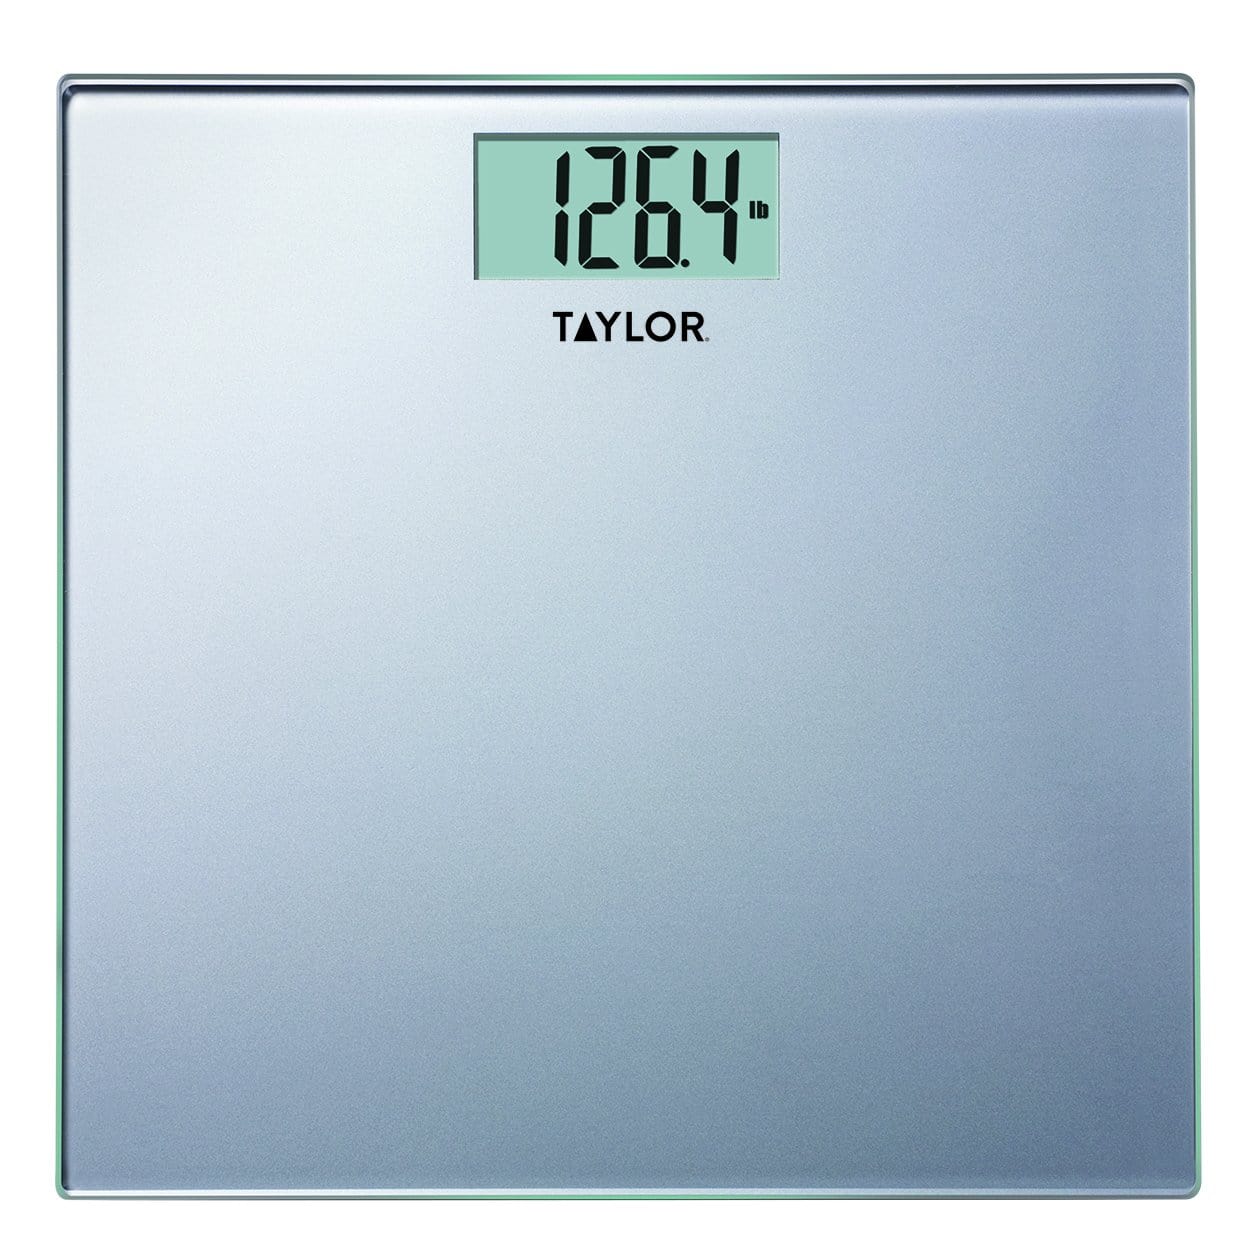 US Digital LCD Glass Bathroom Weighing Scale Silver Max 180kg Compact Mechanical 